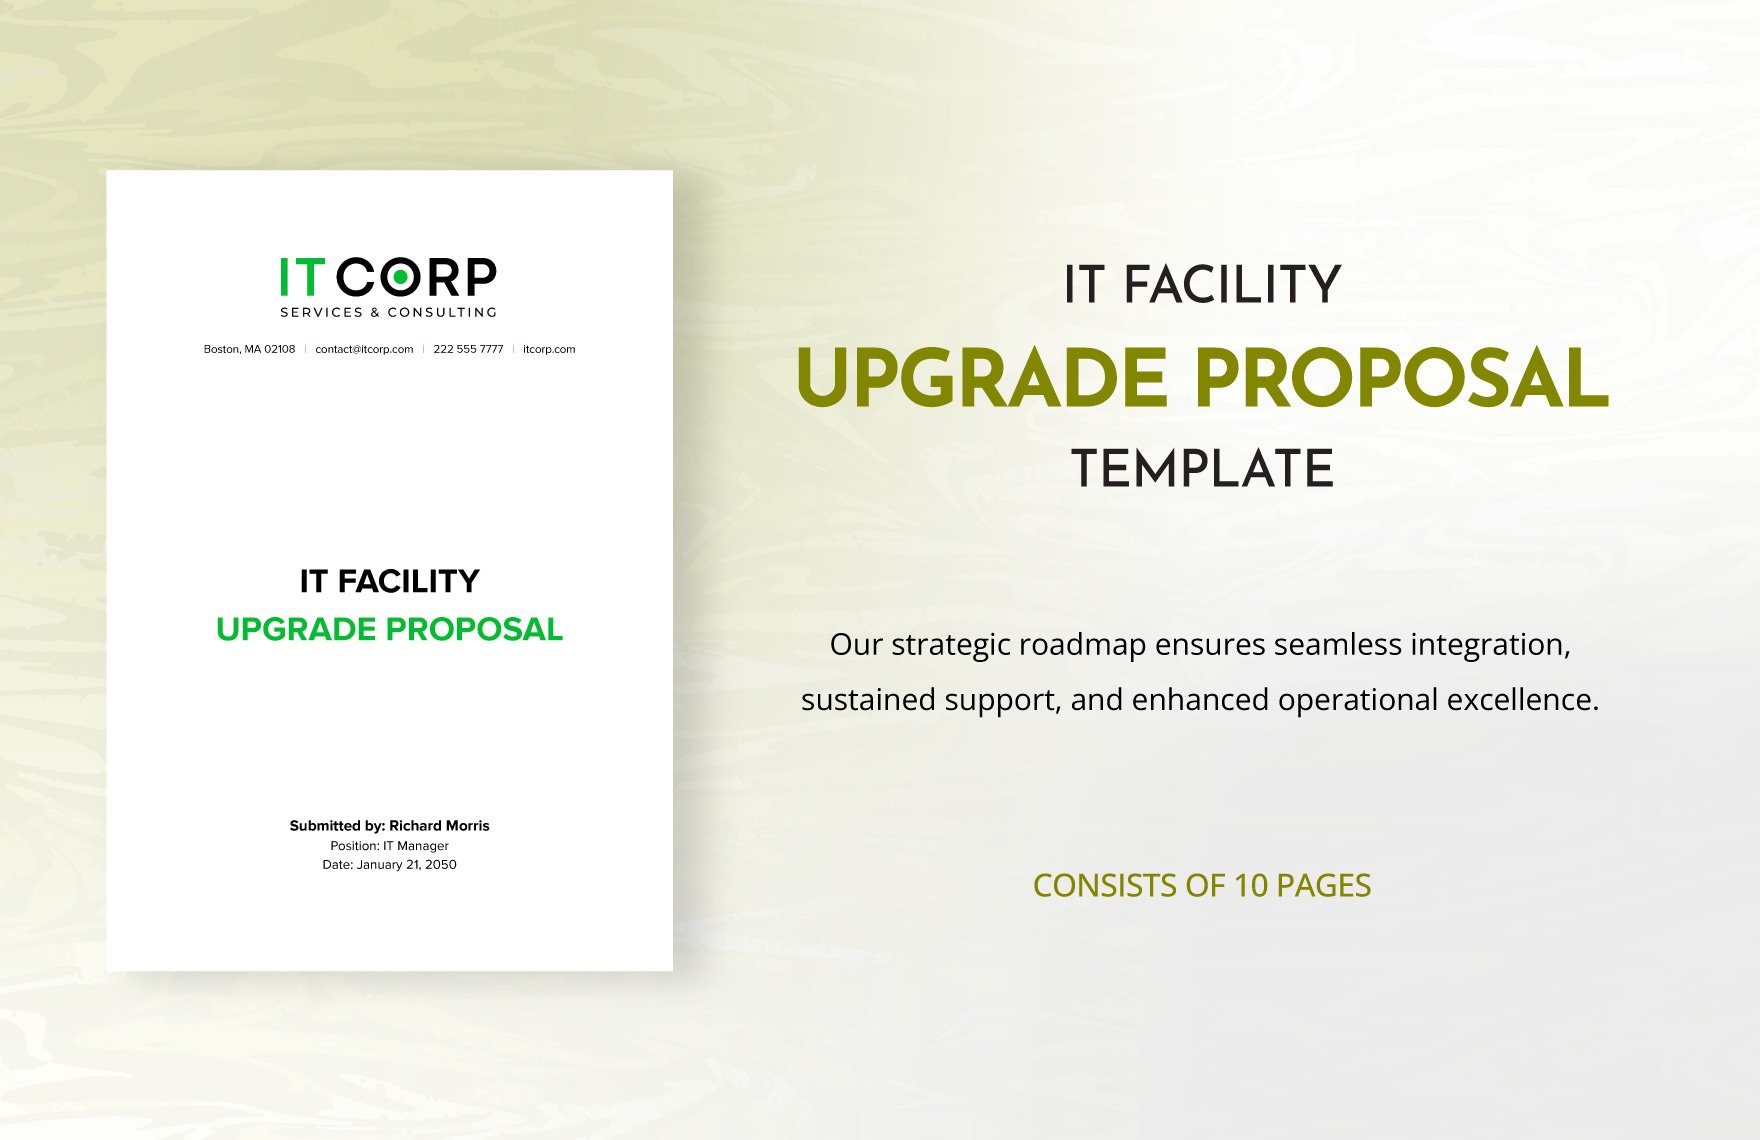 IT Facility Upgrade Proposal Template